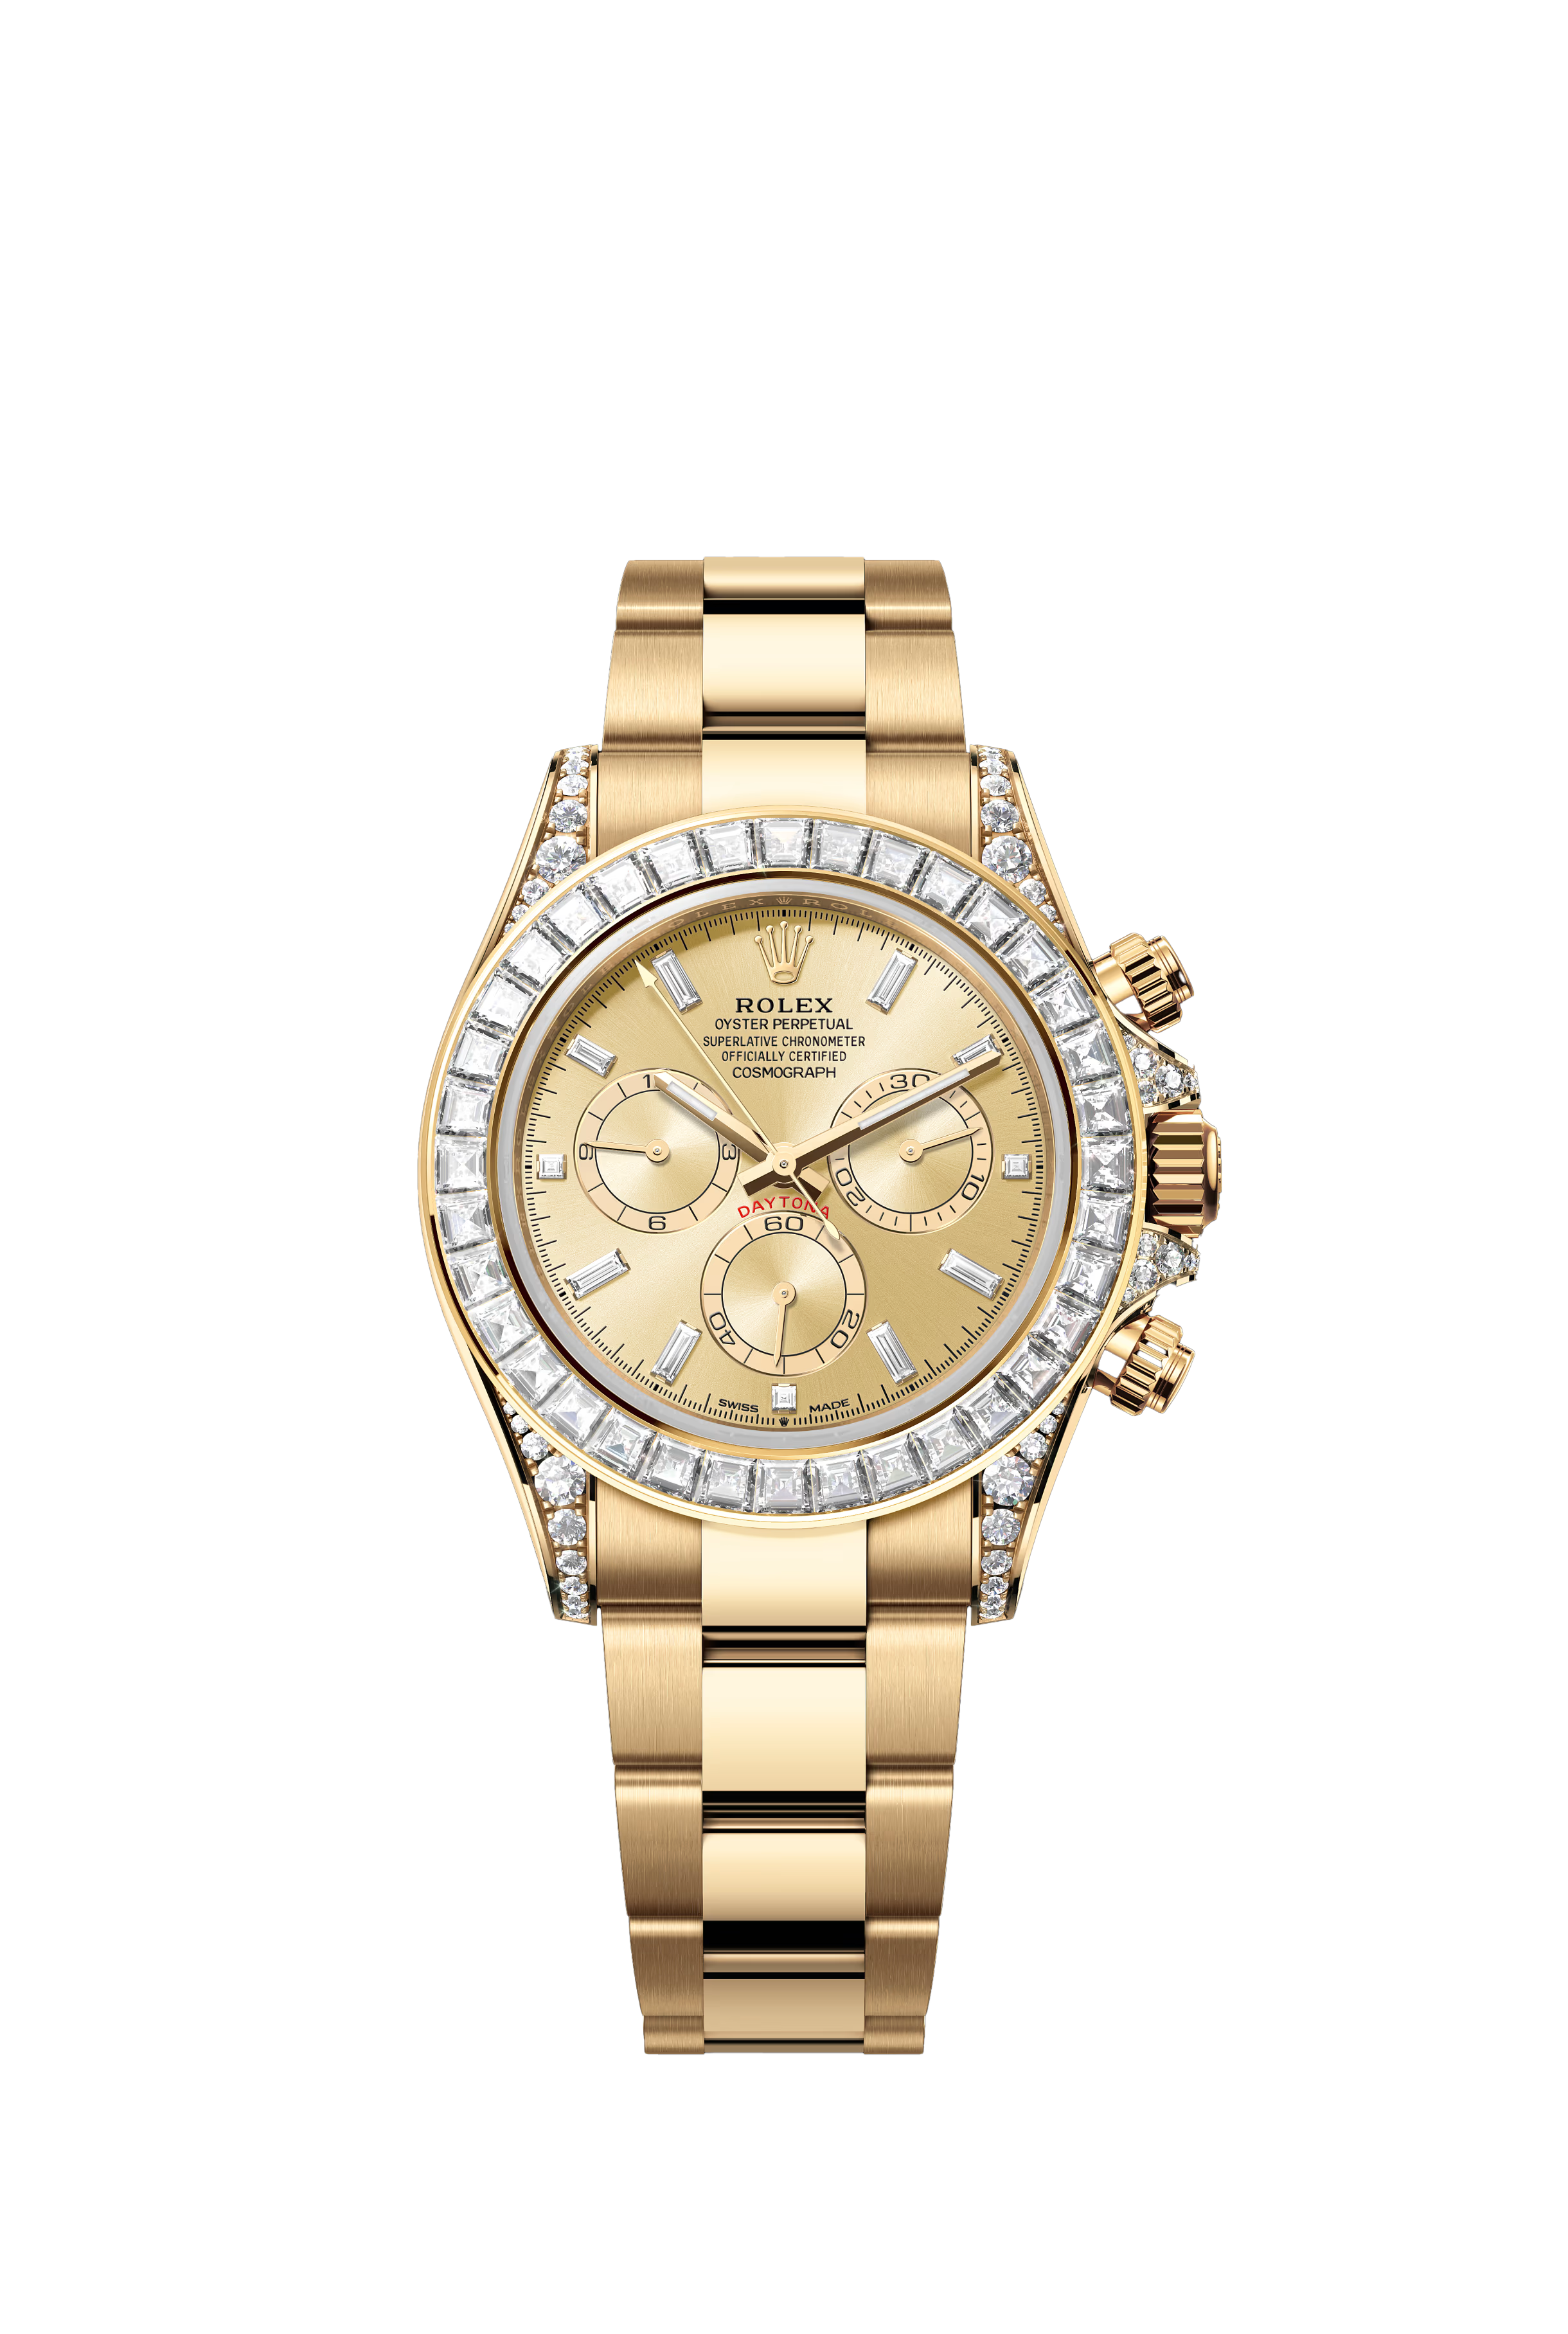 Rolex Cosmograph Daytona Oyster, 40 mm, yellow gold and diamonds Reference 126598TBR